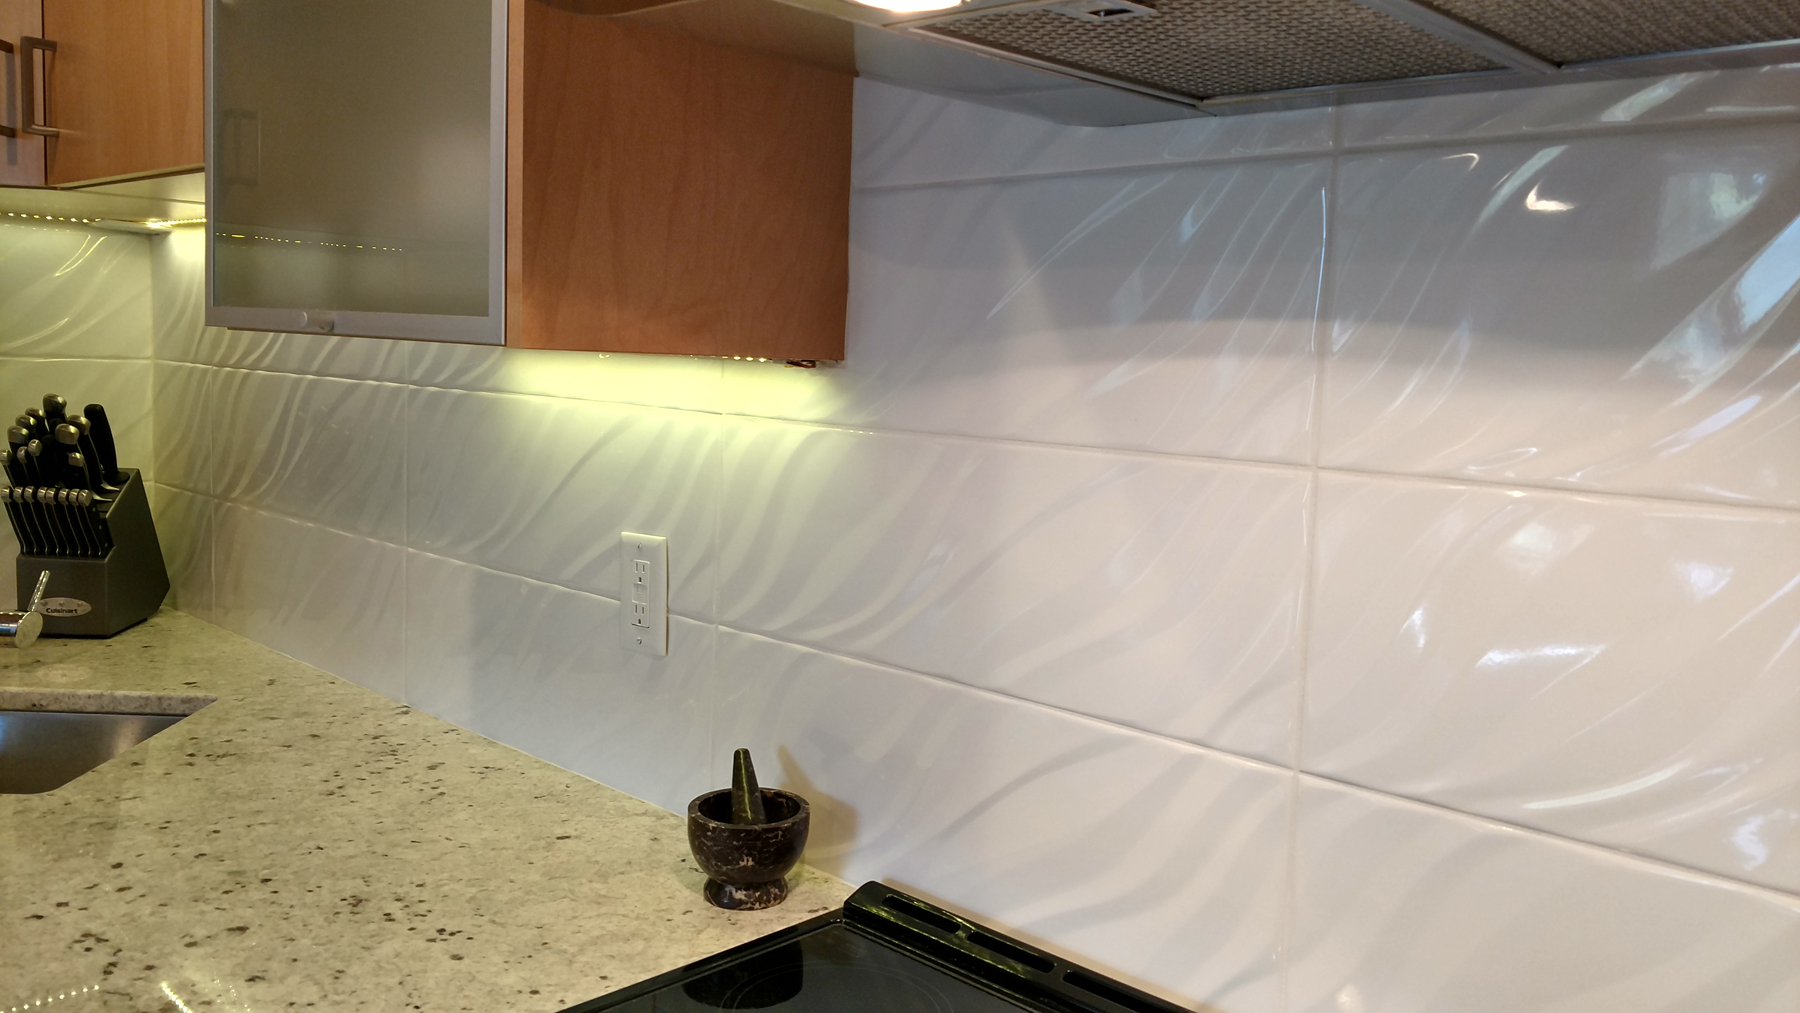 Crazy Wavy backsplash tiles- Yes there is a pattern